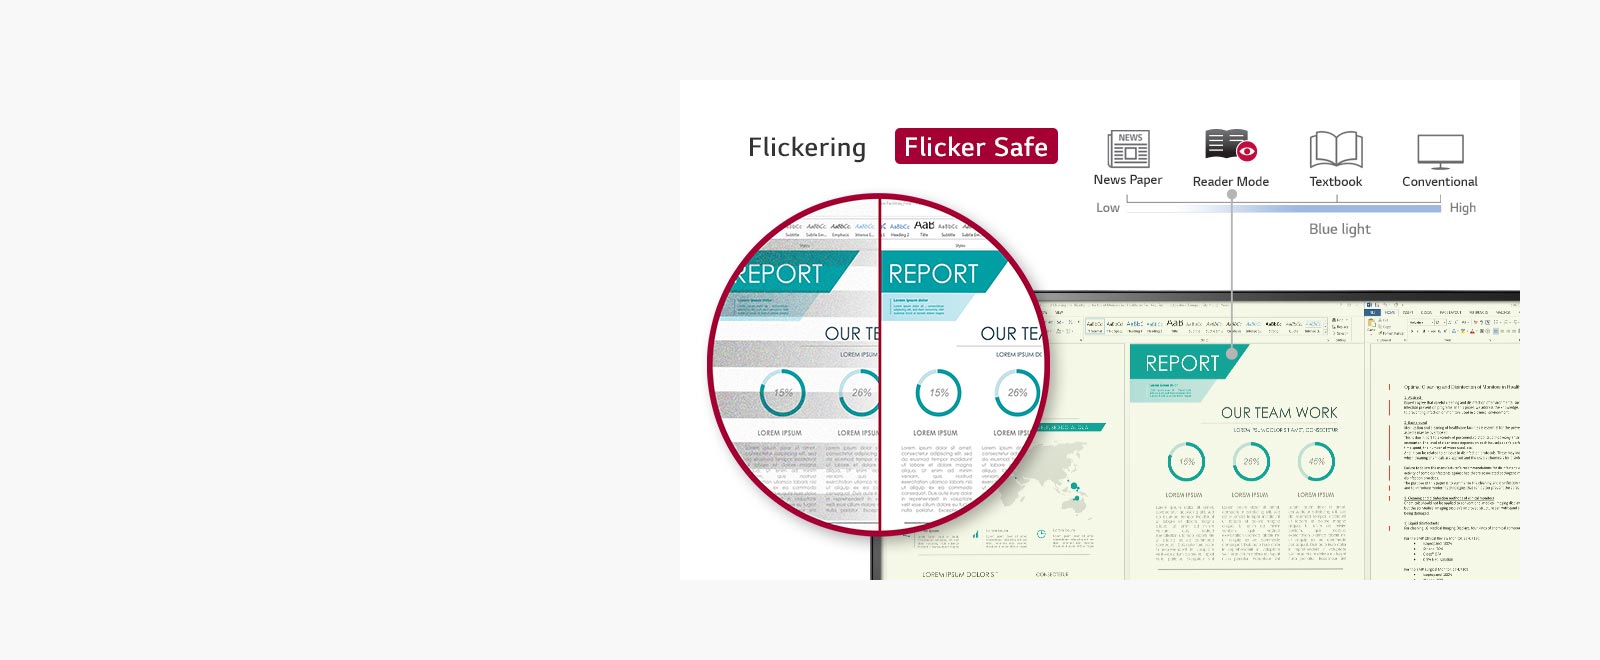 With Reader Mode, you can read content in screen like Textbook and News Paper while enjoying clean screen with Flicker Safe.